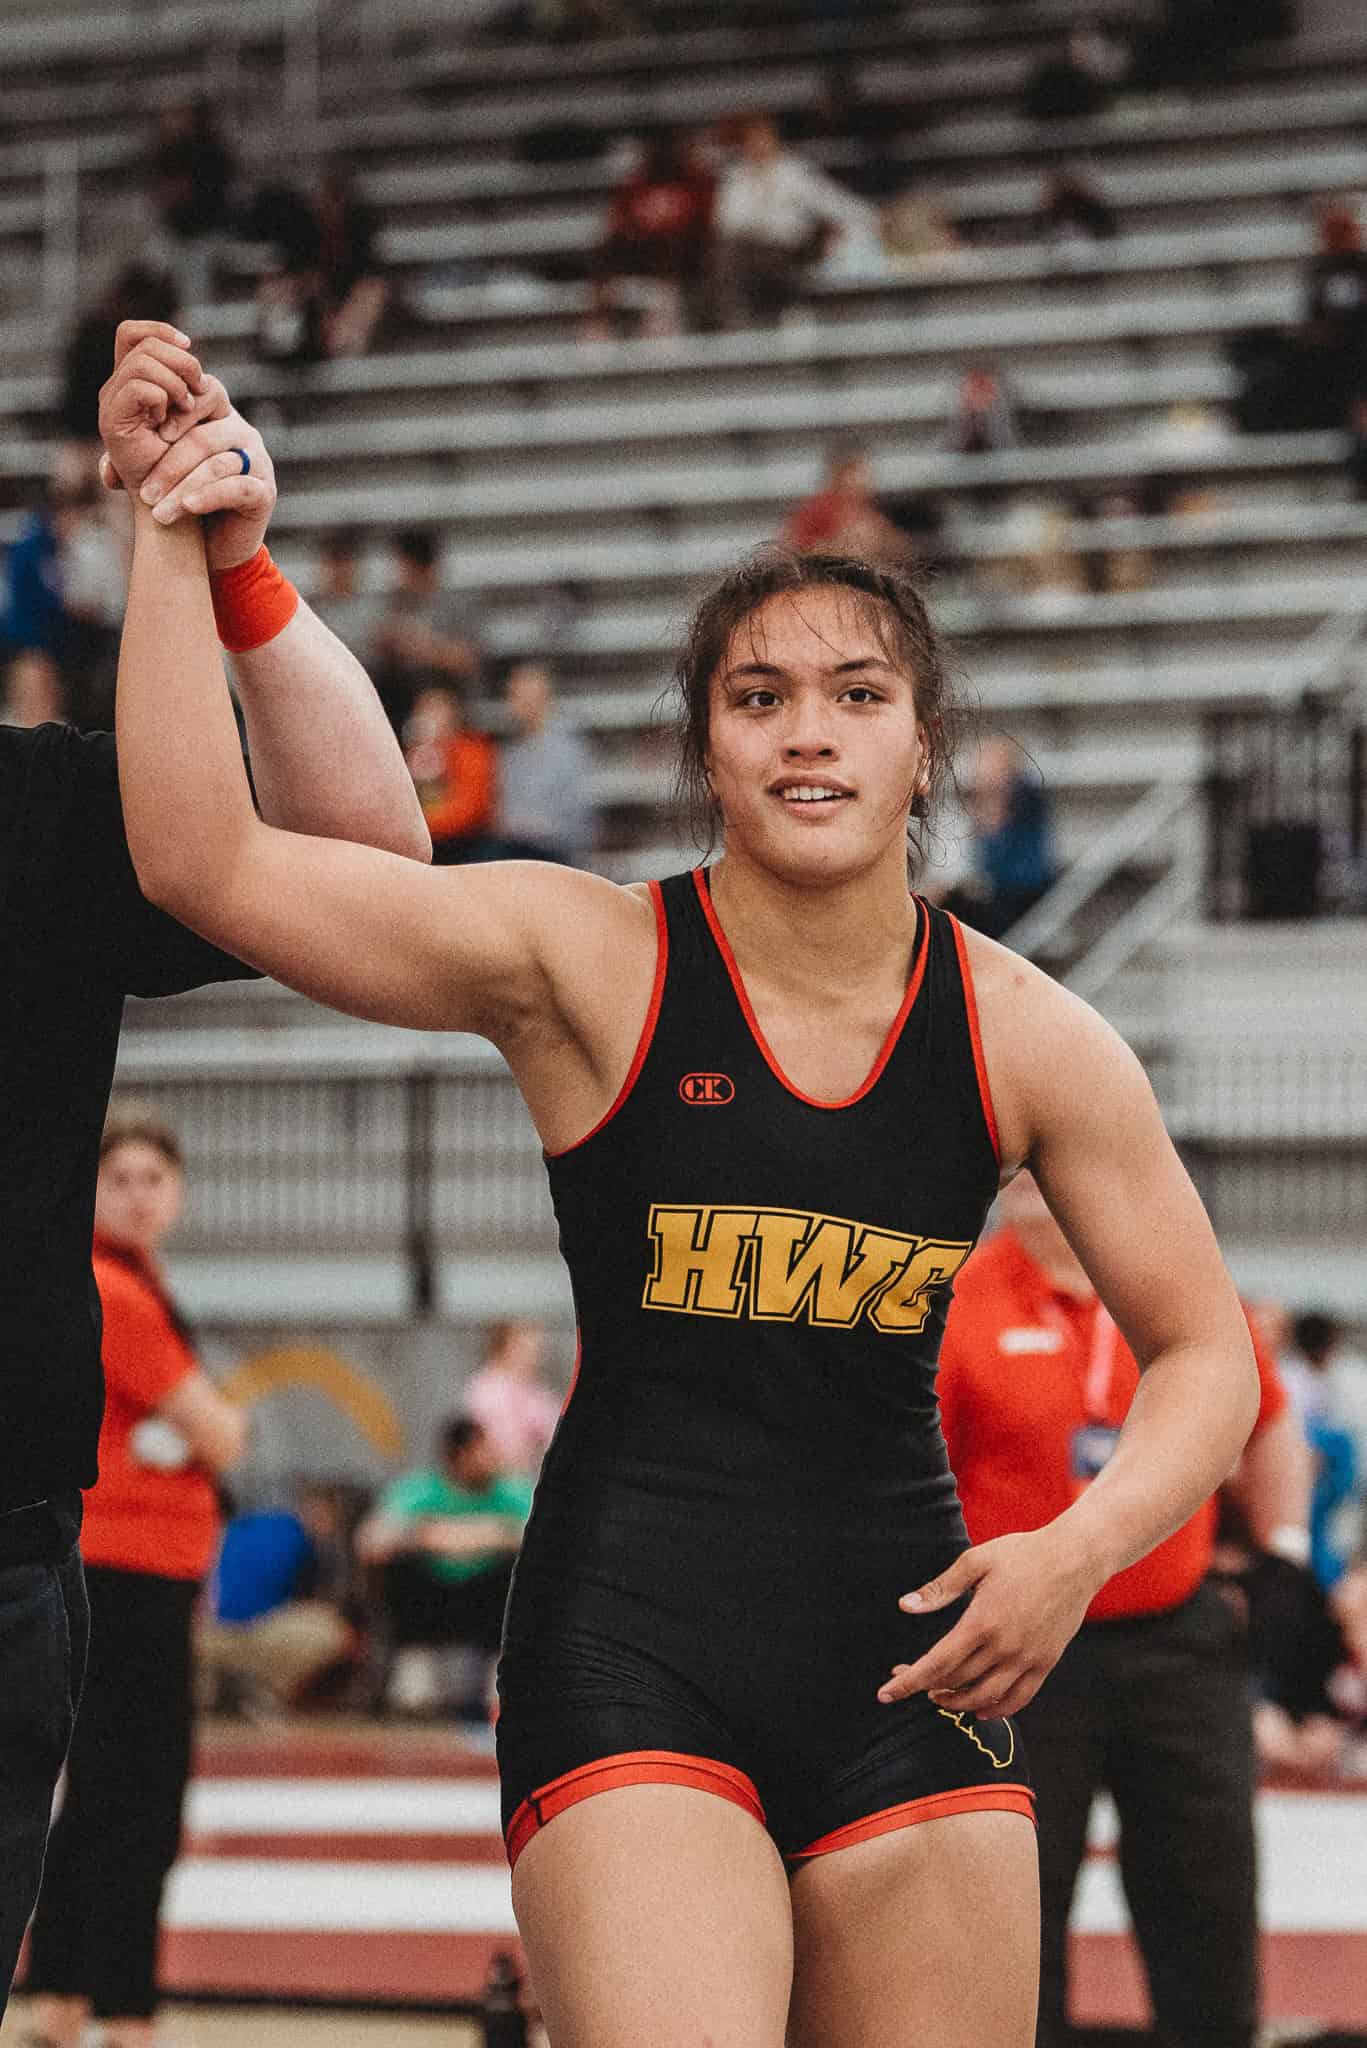 Grace Leota gets her hand raised in the U20 division at Women's Nationals in Spokane, WA. [Photo by Cynthia Leota]